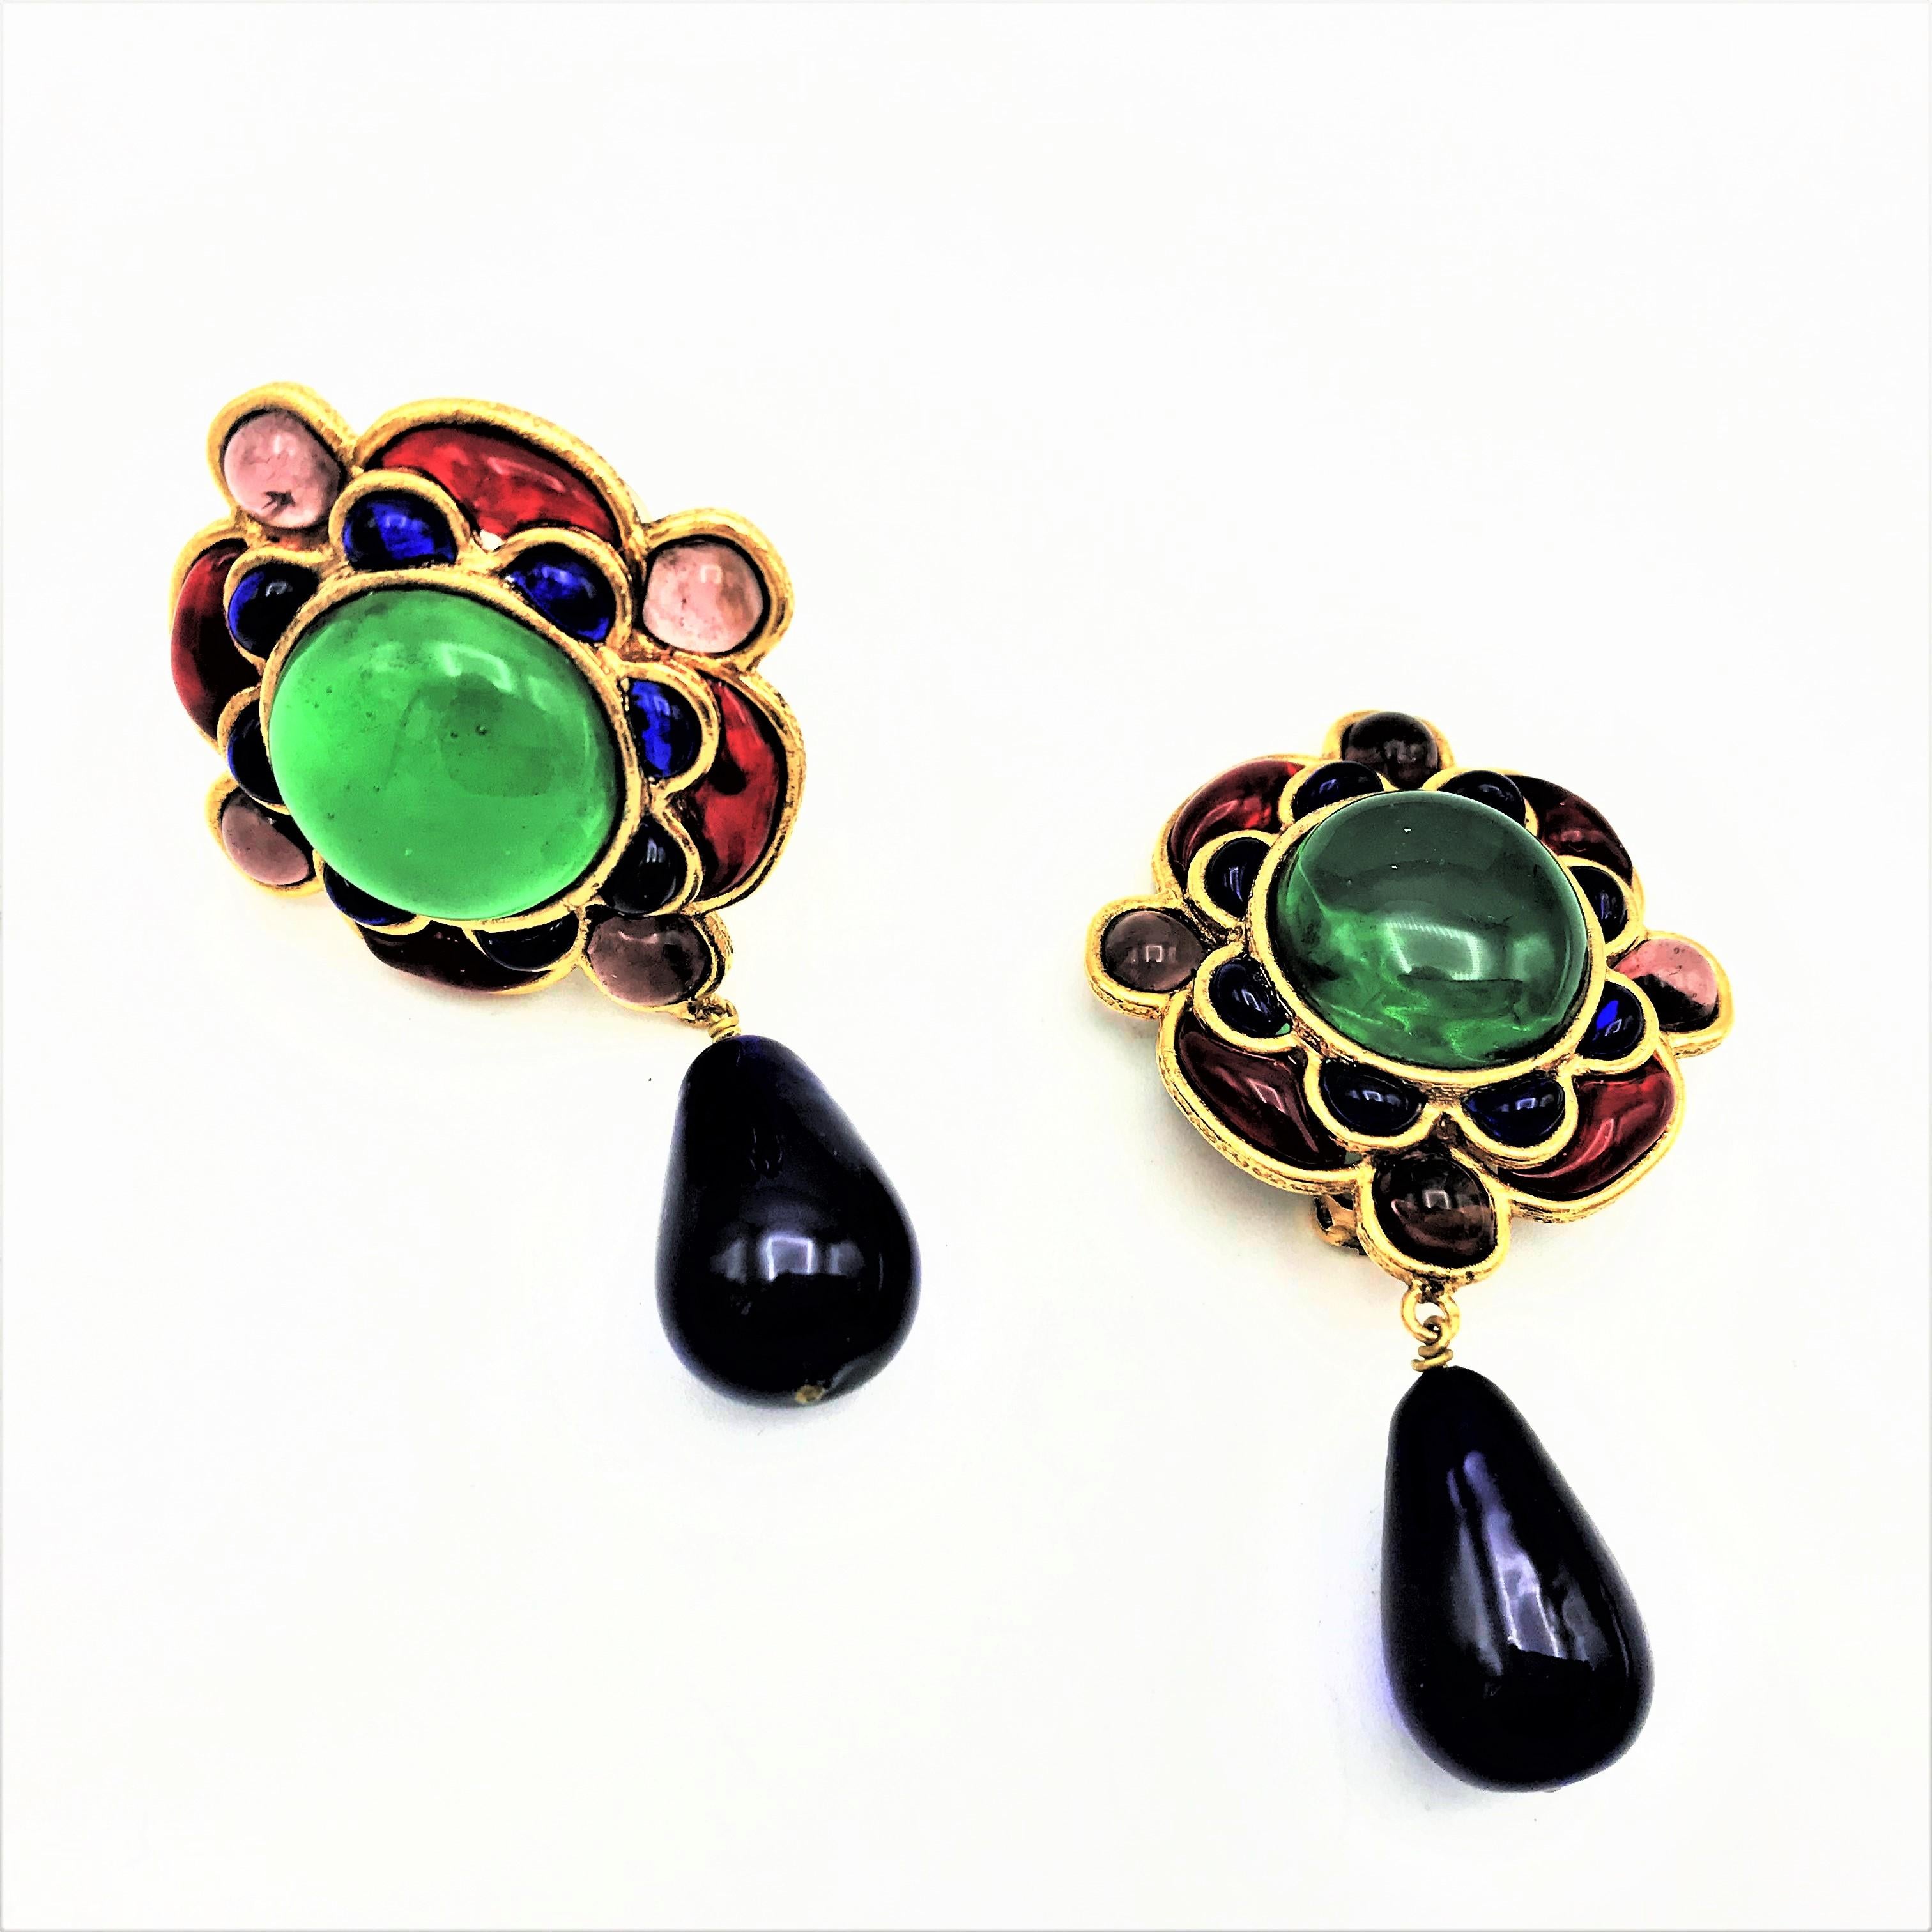 A new Flower drop clip-on earring in the styl of Chanel gilded metal polychrome glass past in green, blue, red and light purple . Unsigned.
Measurement: Full length 6,5 cm, flower 3,8 cm x 3,8 cm, blue glass trop 2 cm. Very good condition. 
